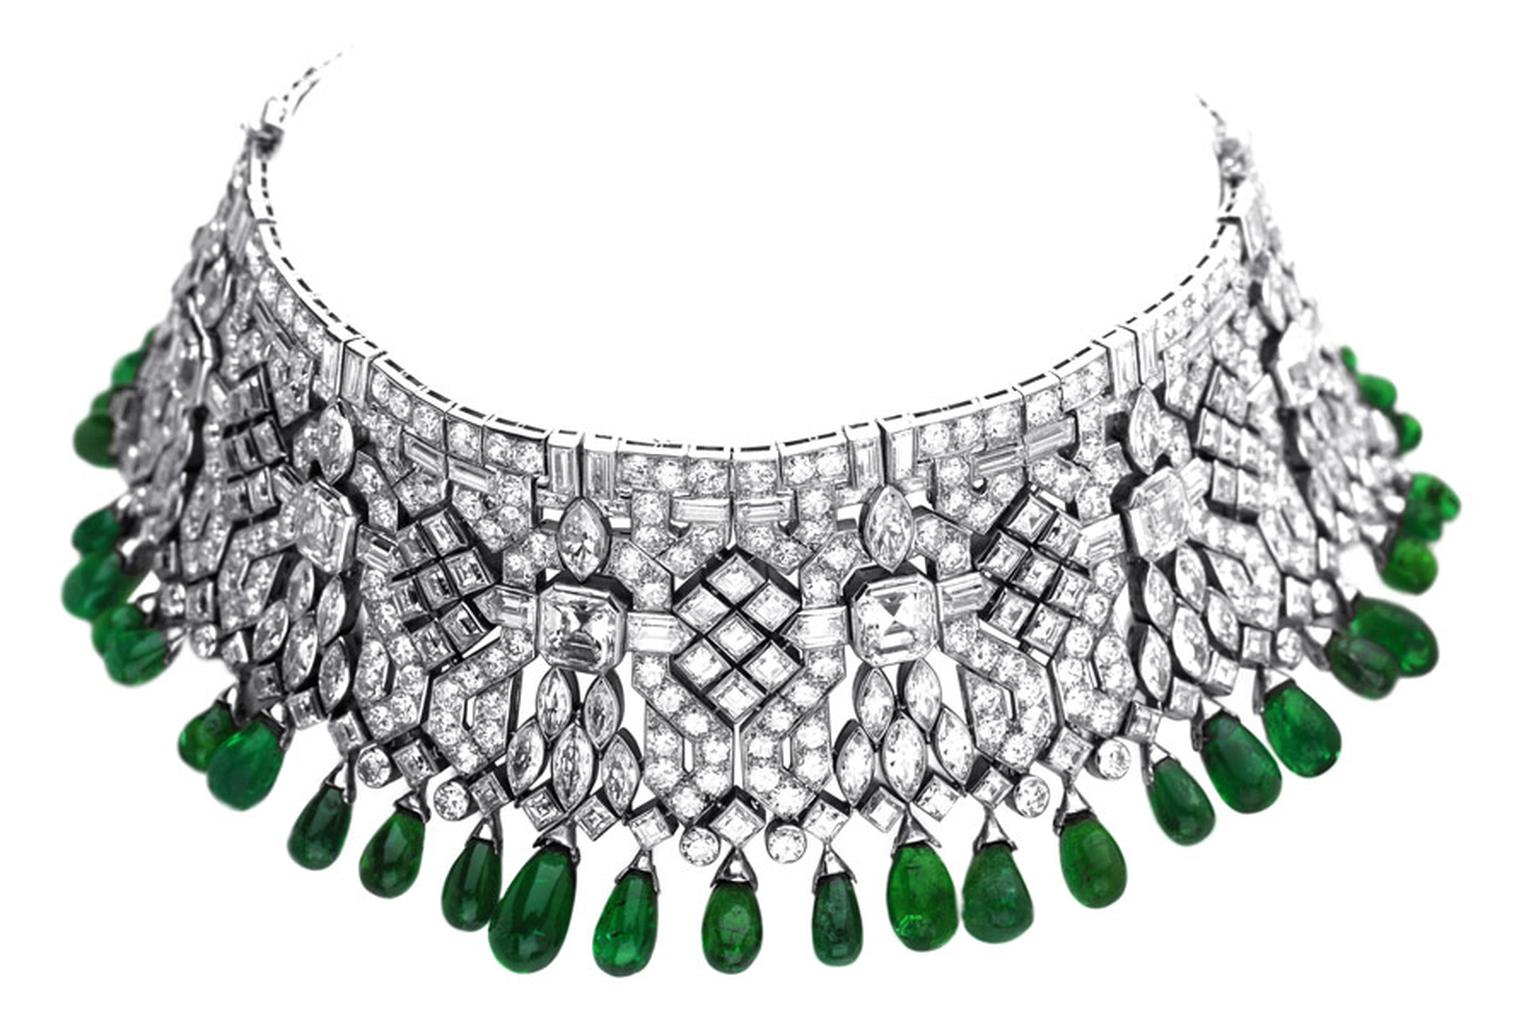 Van-Cleef-Arpels-Indian-bracelets-transformable-into-a-choker-ordered-by-Daisy-Fellowes-1928-Private-Collection_3